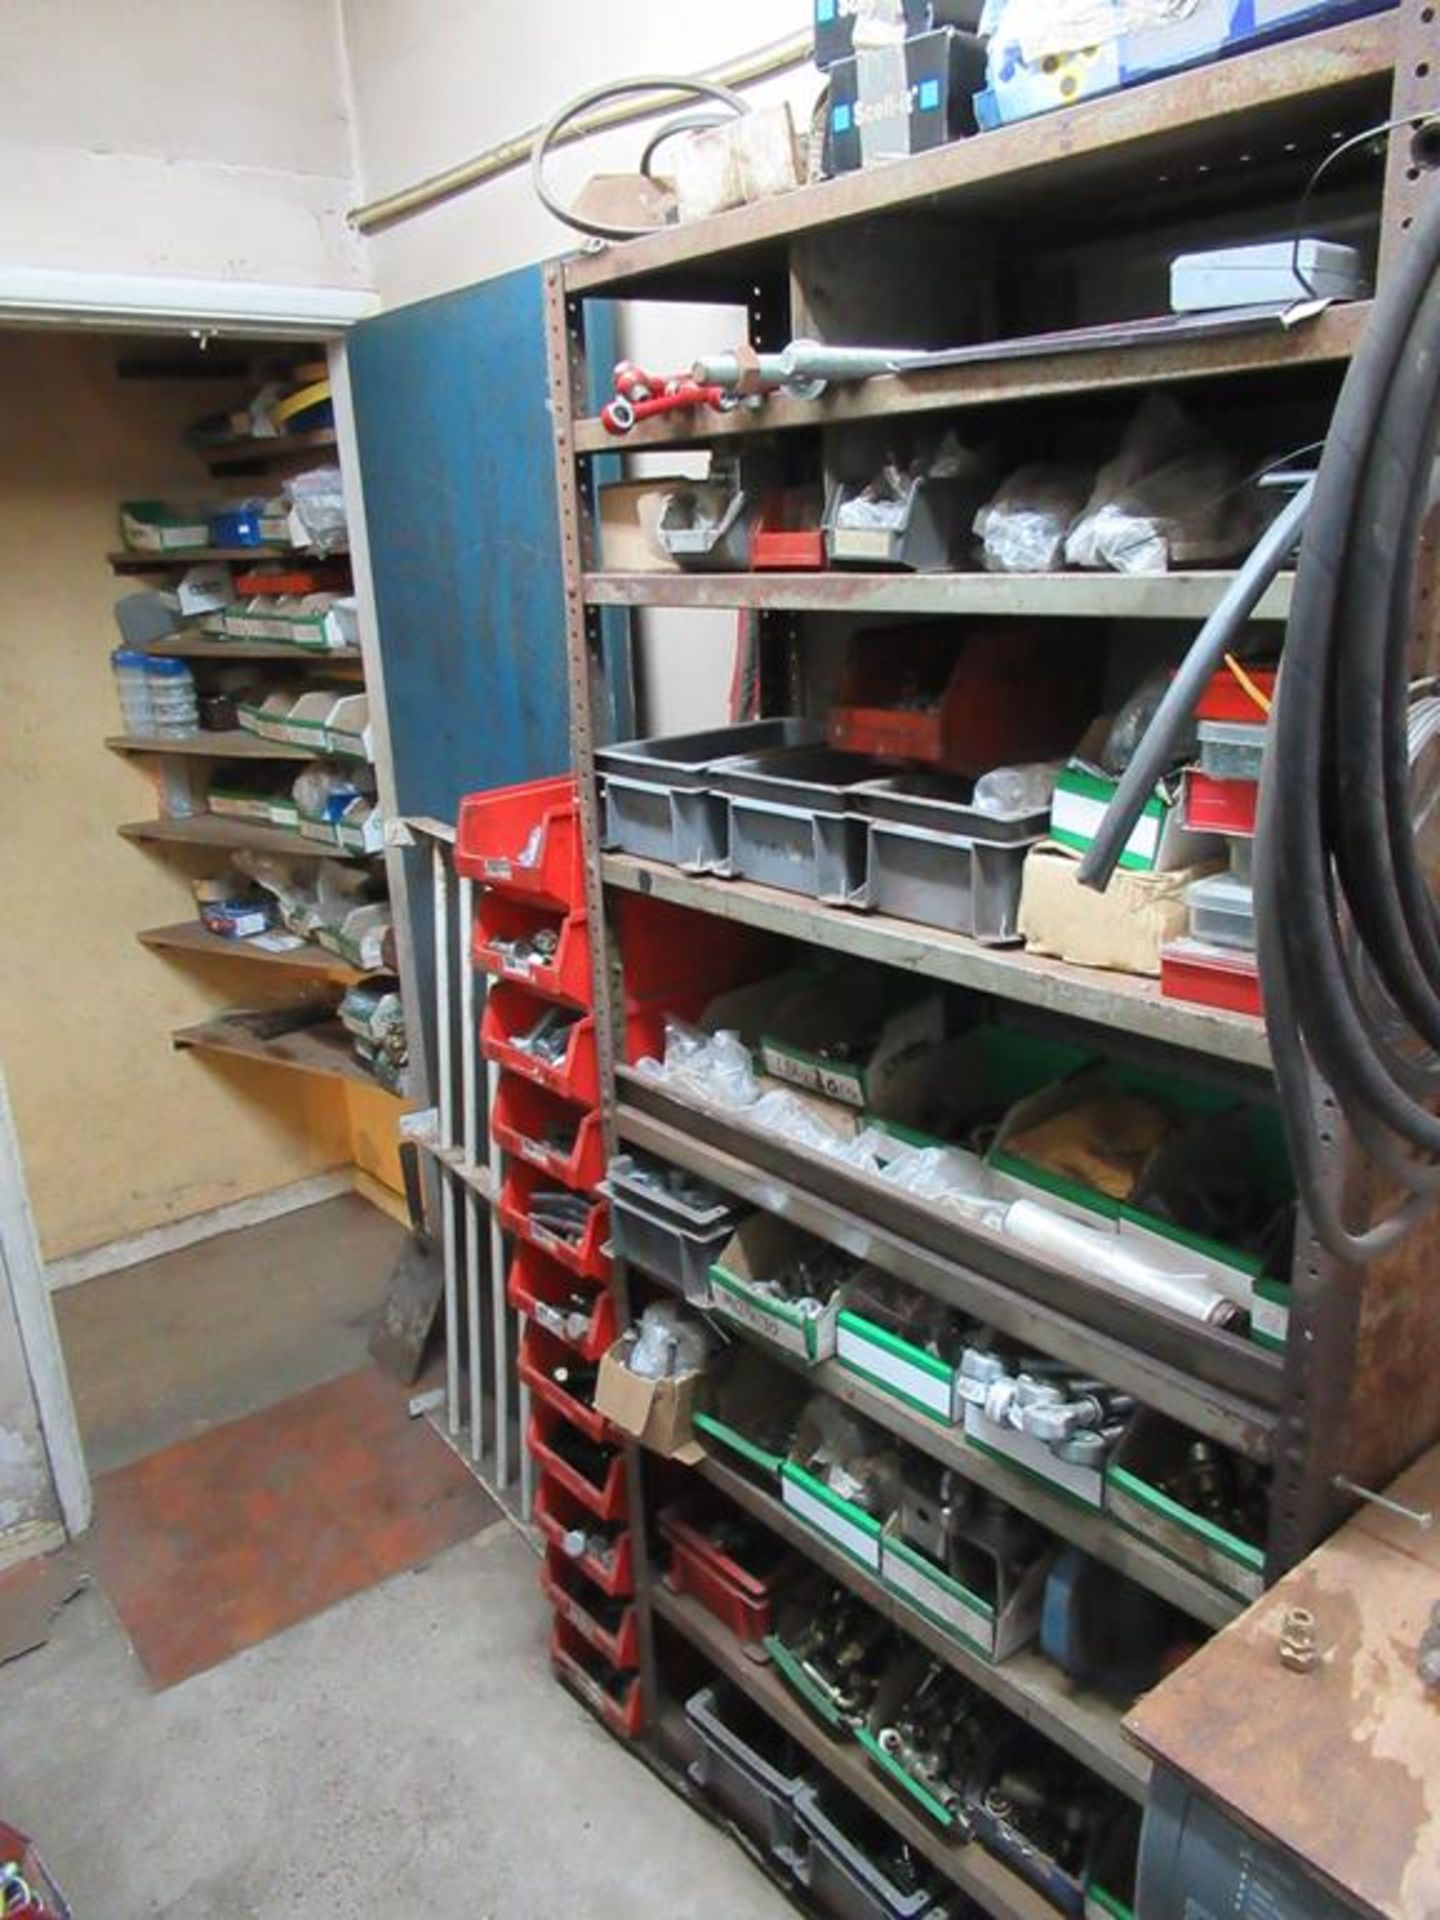 Contents of spares/store room - Image 4 of 6